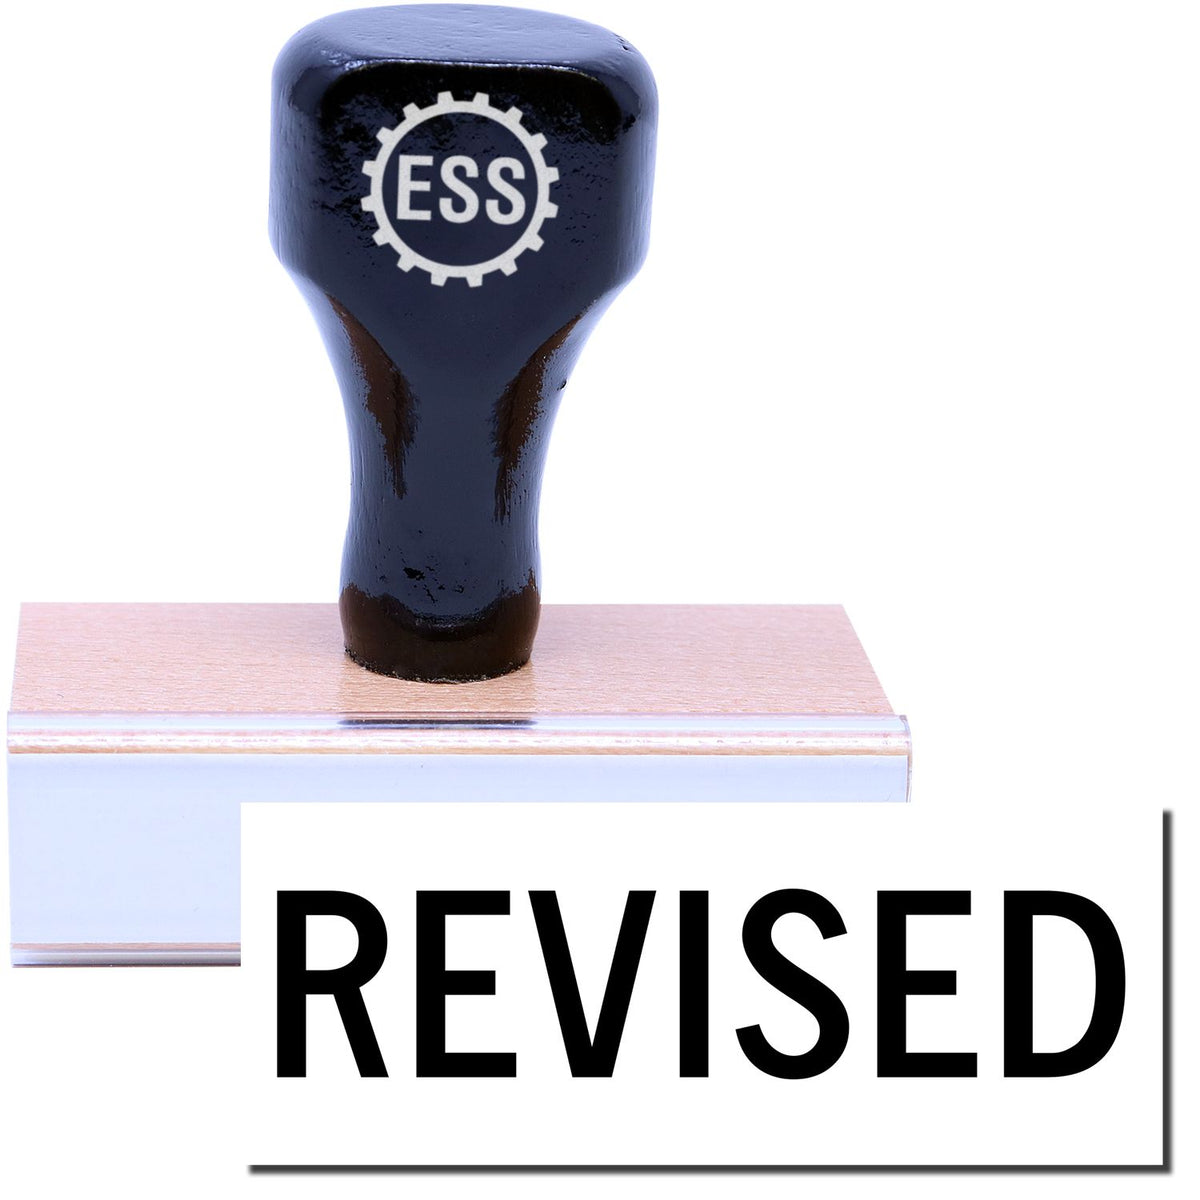 A stock office rubber stamp with a stamped image showing how the text &quot;REVISED&quot; is displayed after stamping.